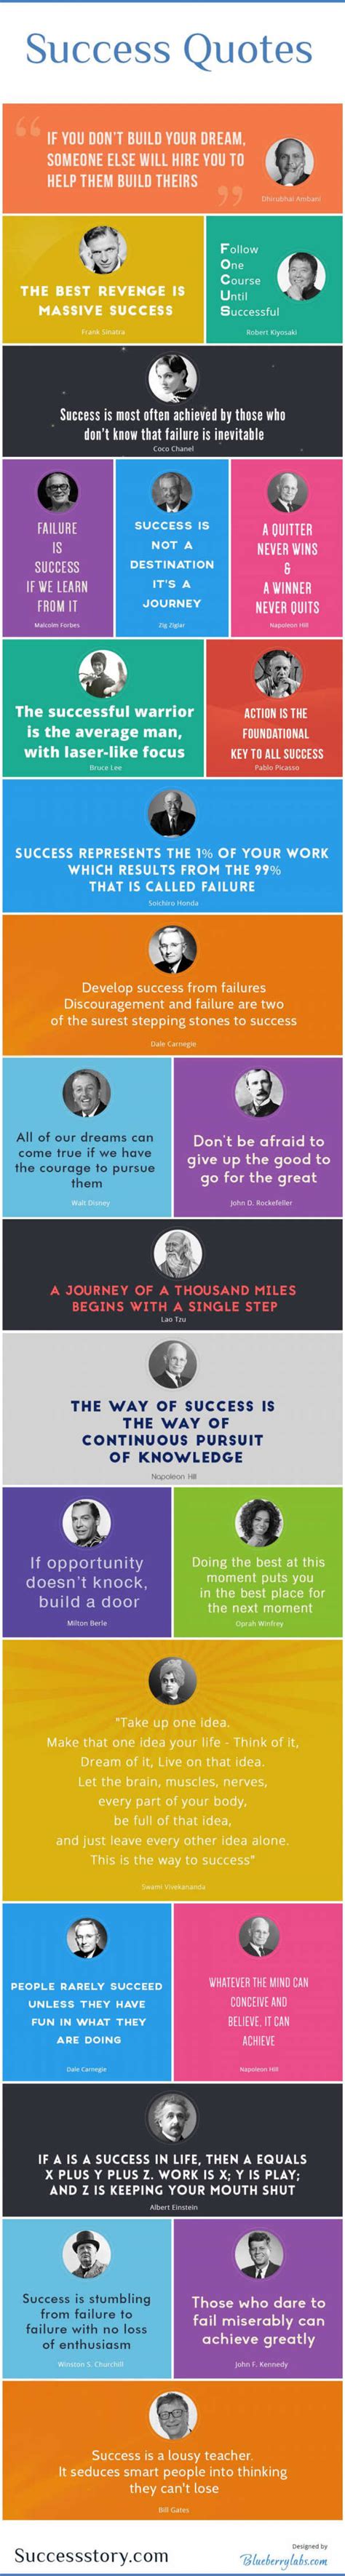 Infographic With Successquotes And Sayings Of Famous People